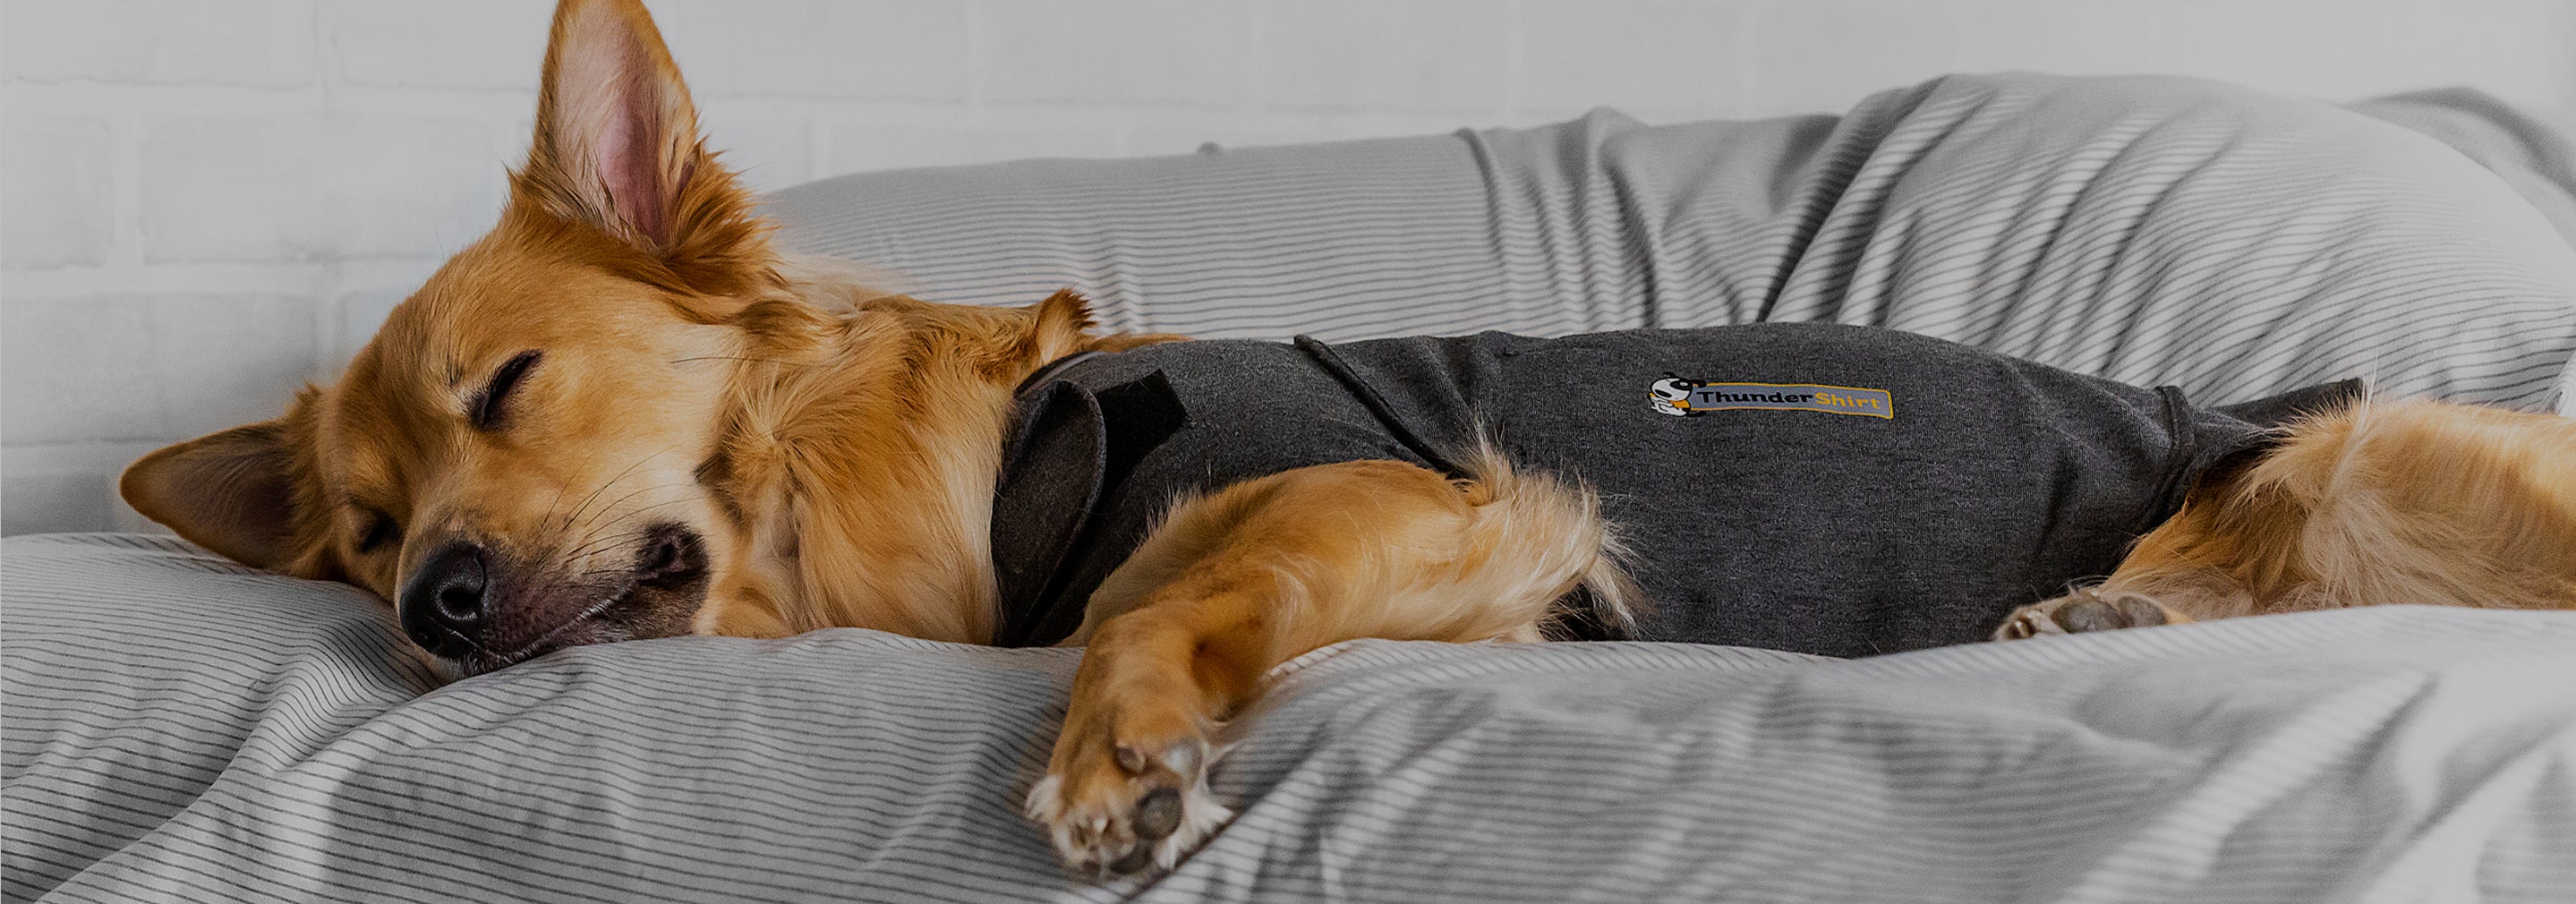 thunder shirts for small dogs